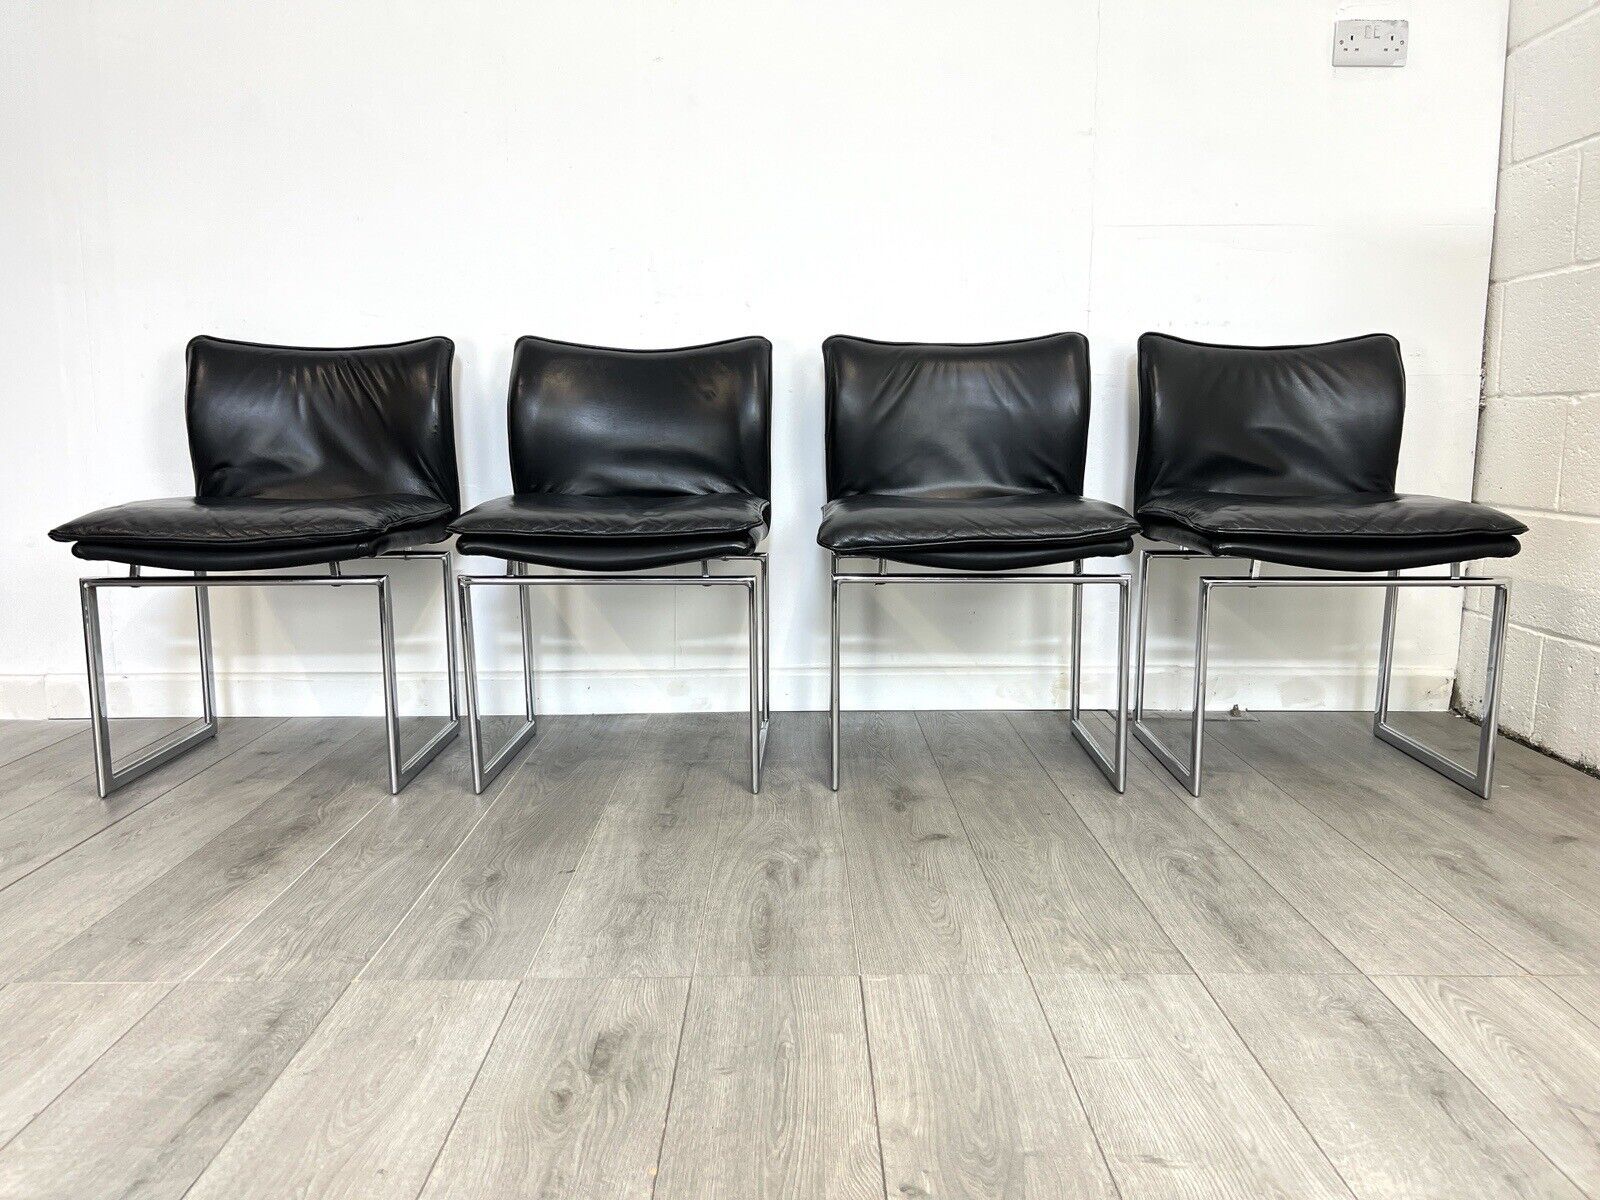 Pieff Epee, Set of 4 Chrome and Black Leather Dining Chairs